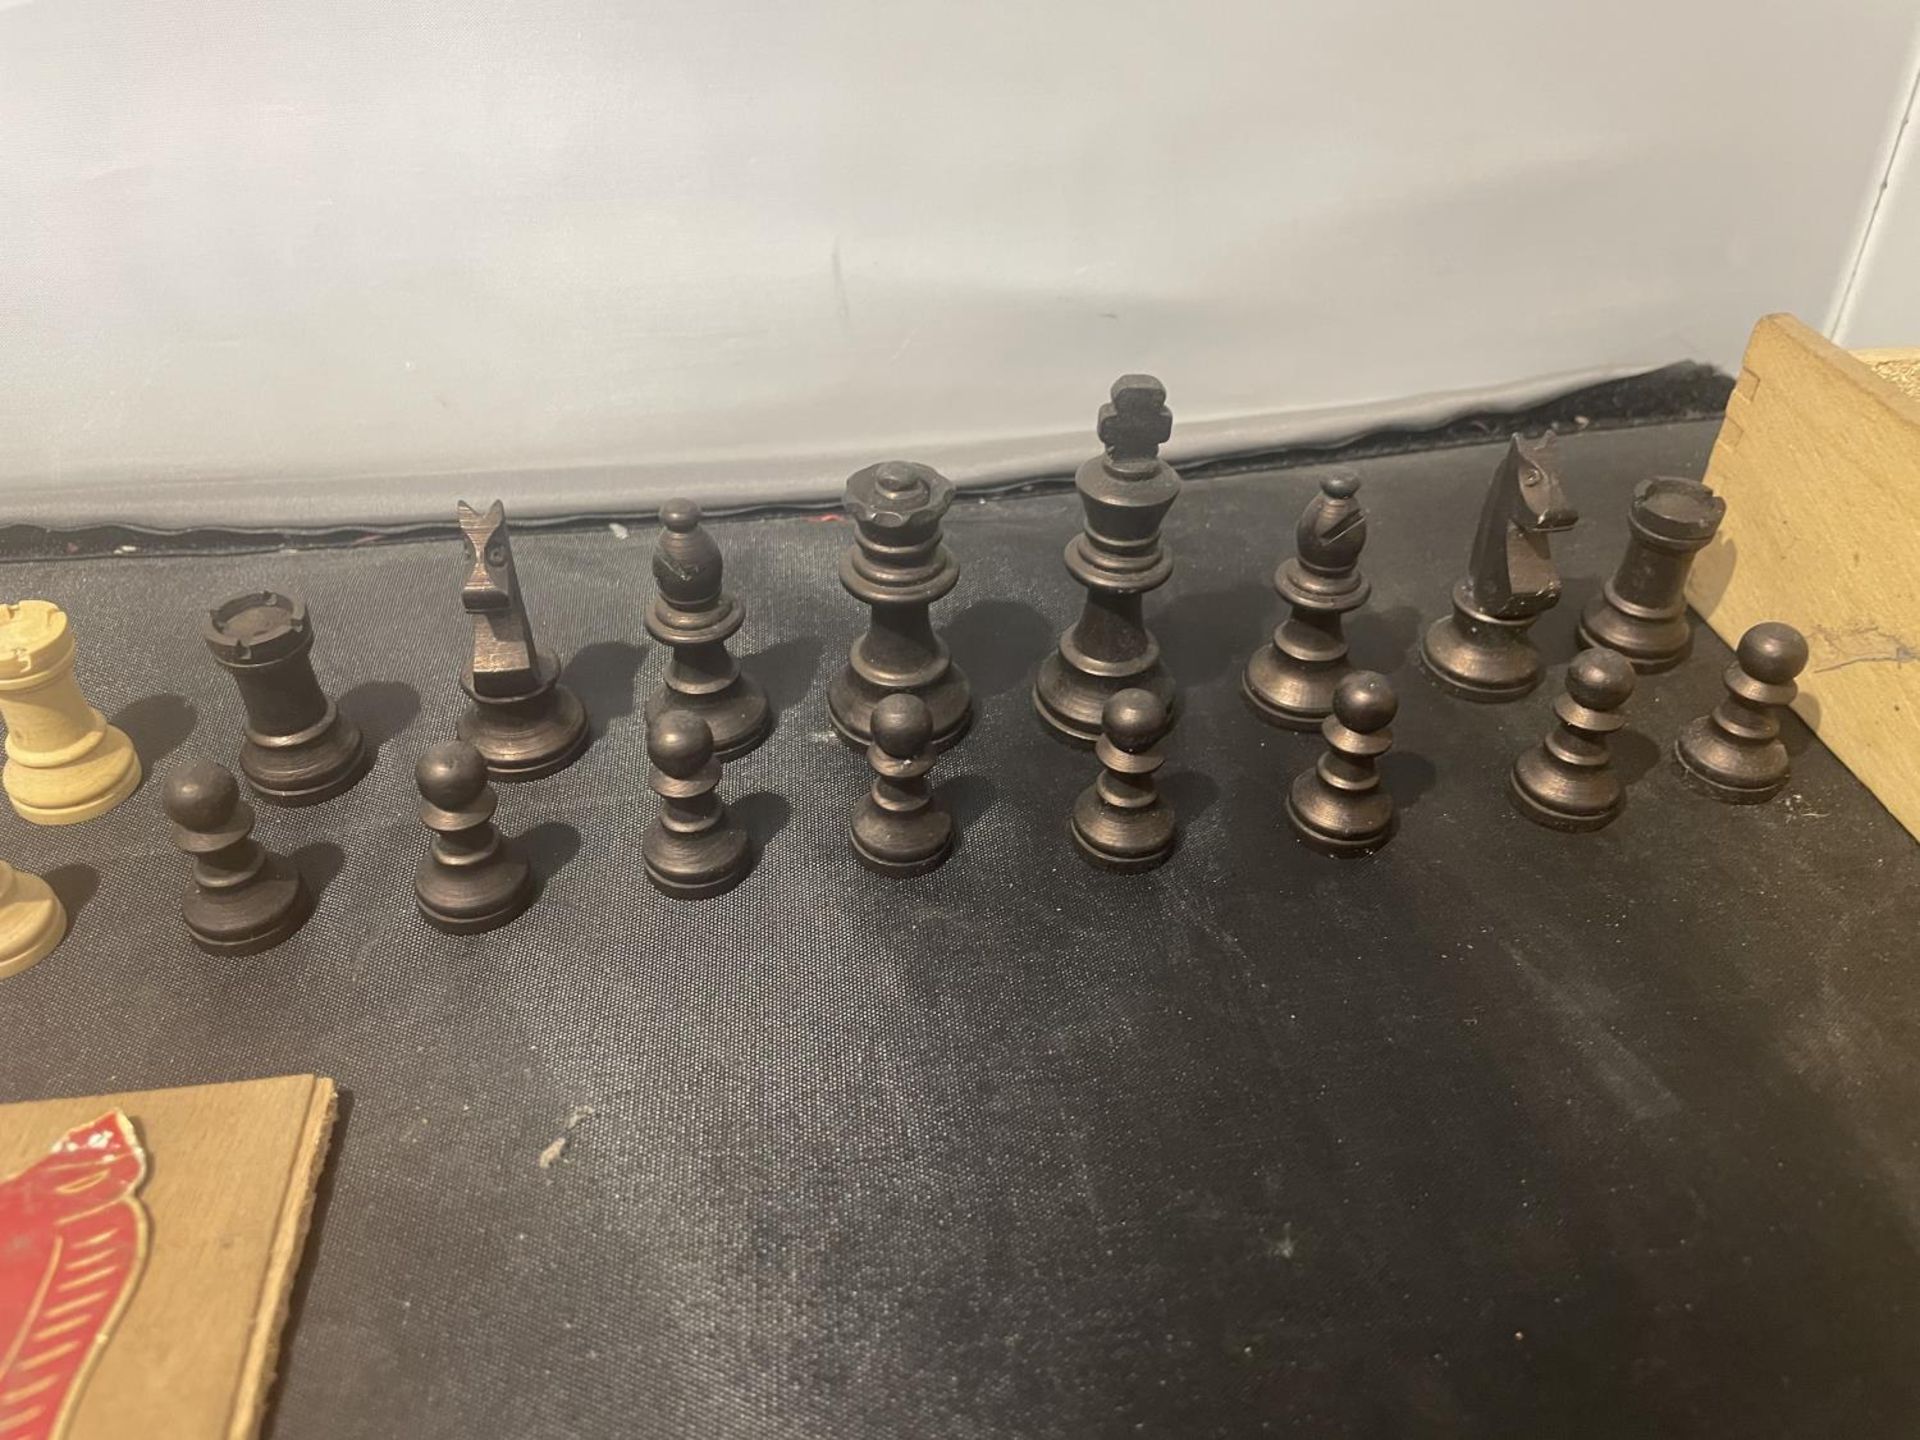 A COMPLETE STAUNTON BOXWOOD CHESS SET - Image 4 of 4